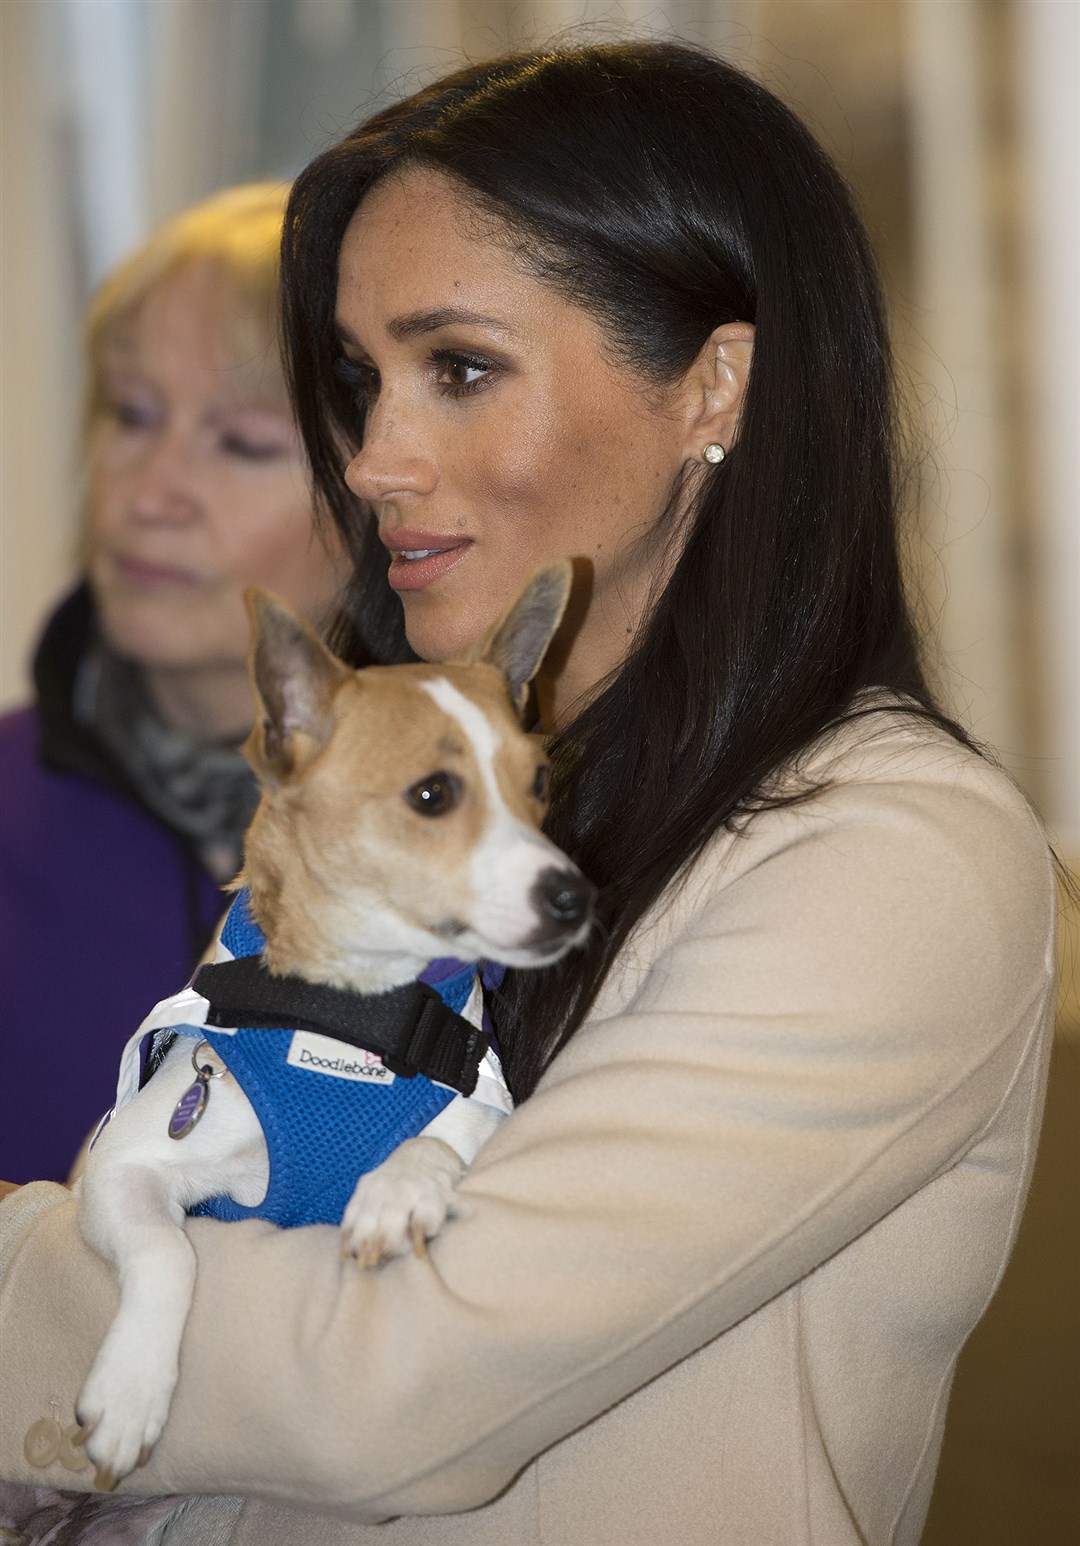 The Duchess of Sussex meets a Jack Russell called Minnie during a visit to Mayhew (Eddie Mulholland/Daily Telegraph/PA)